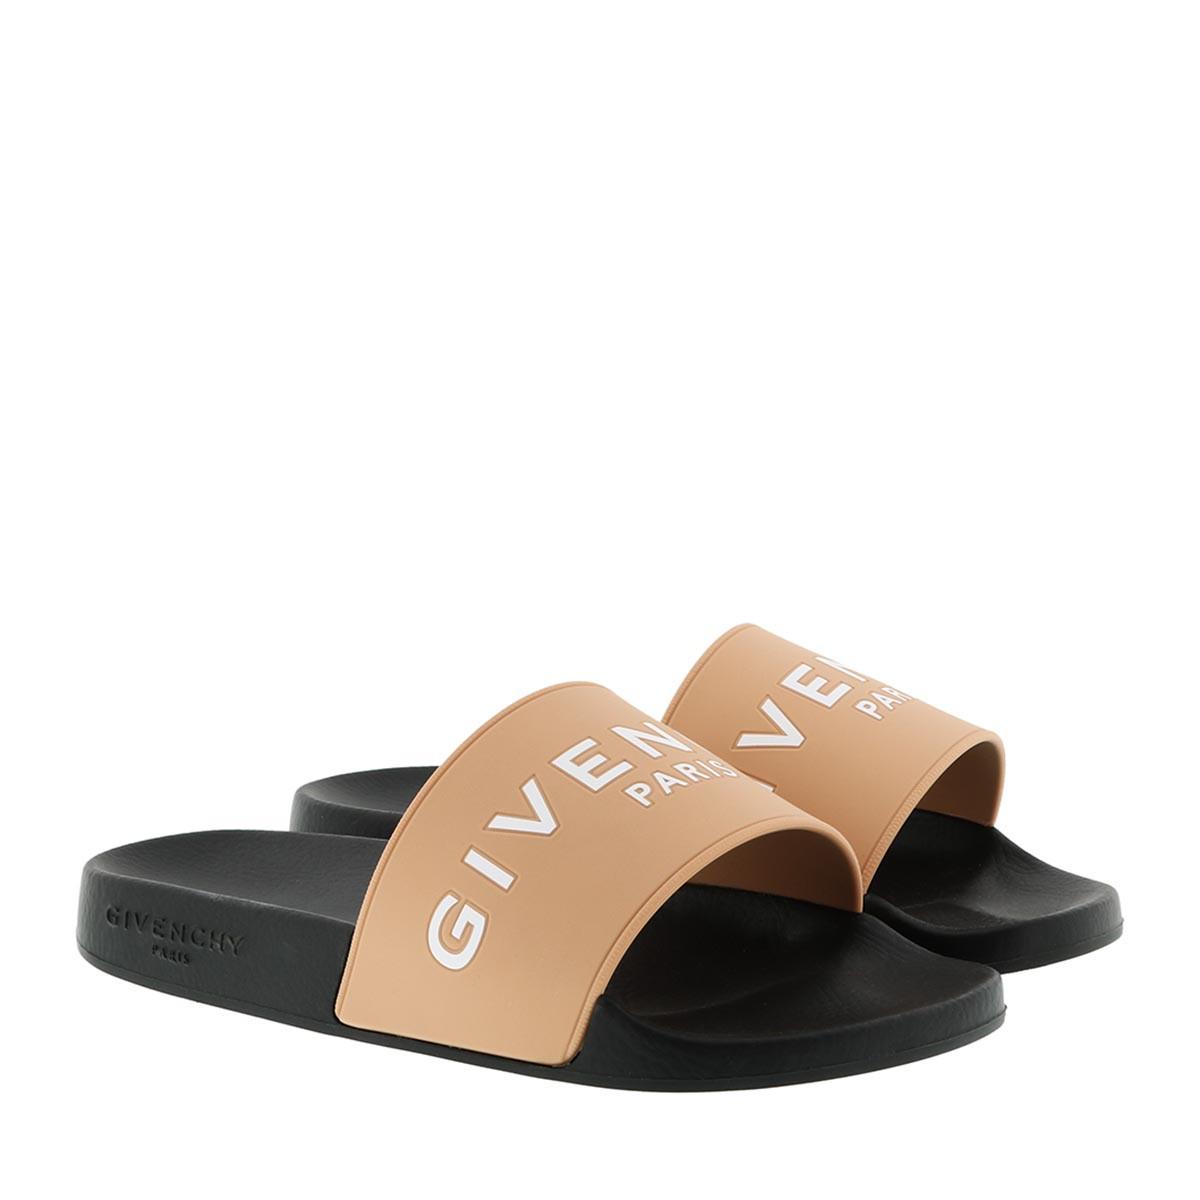 givenchy slides nude